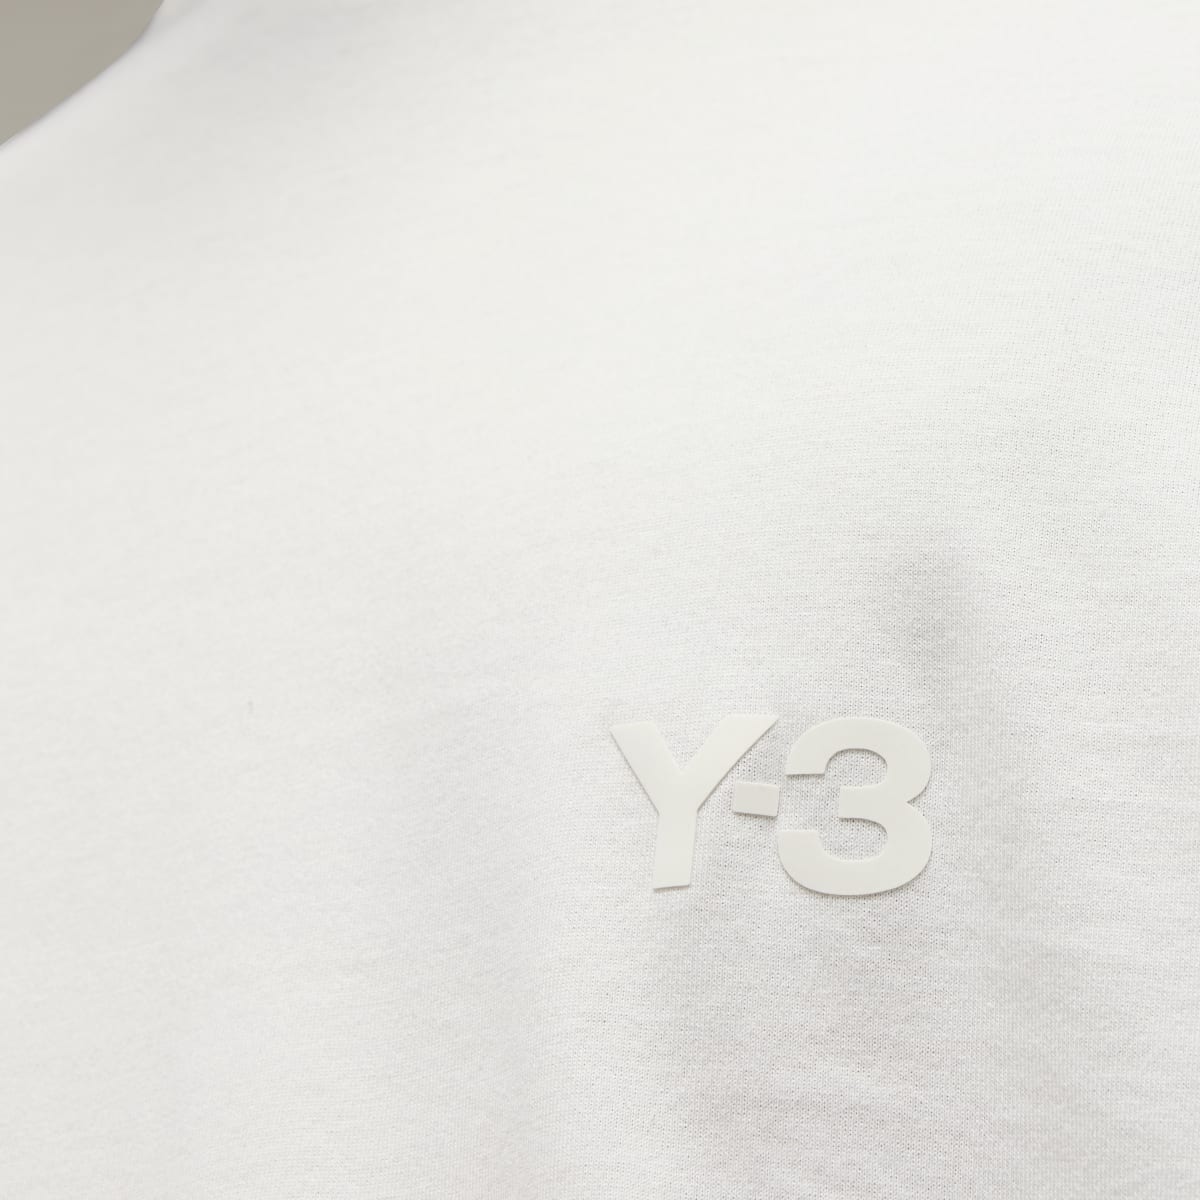 Adidas Y-3 Relaxed T-Shirt. 4